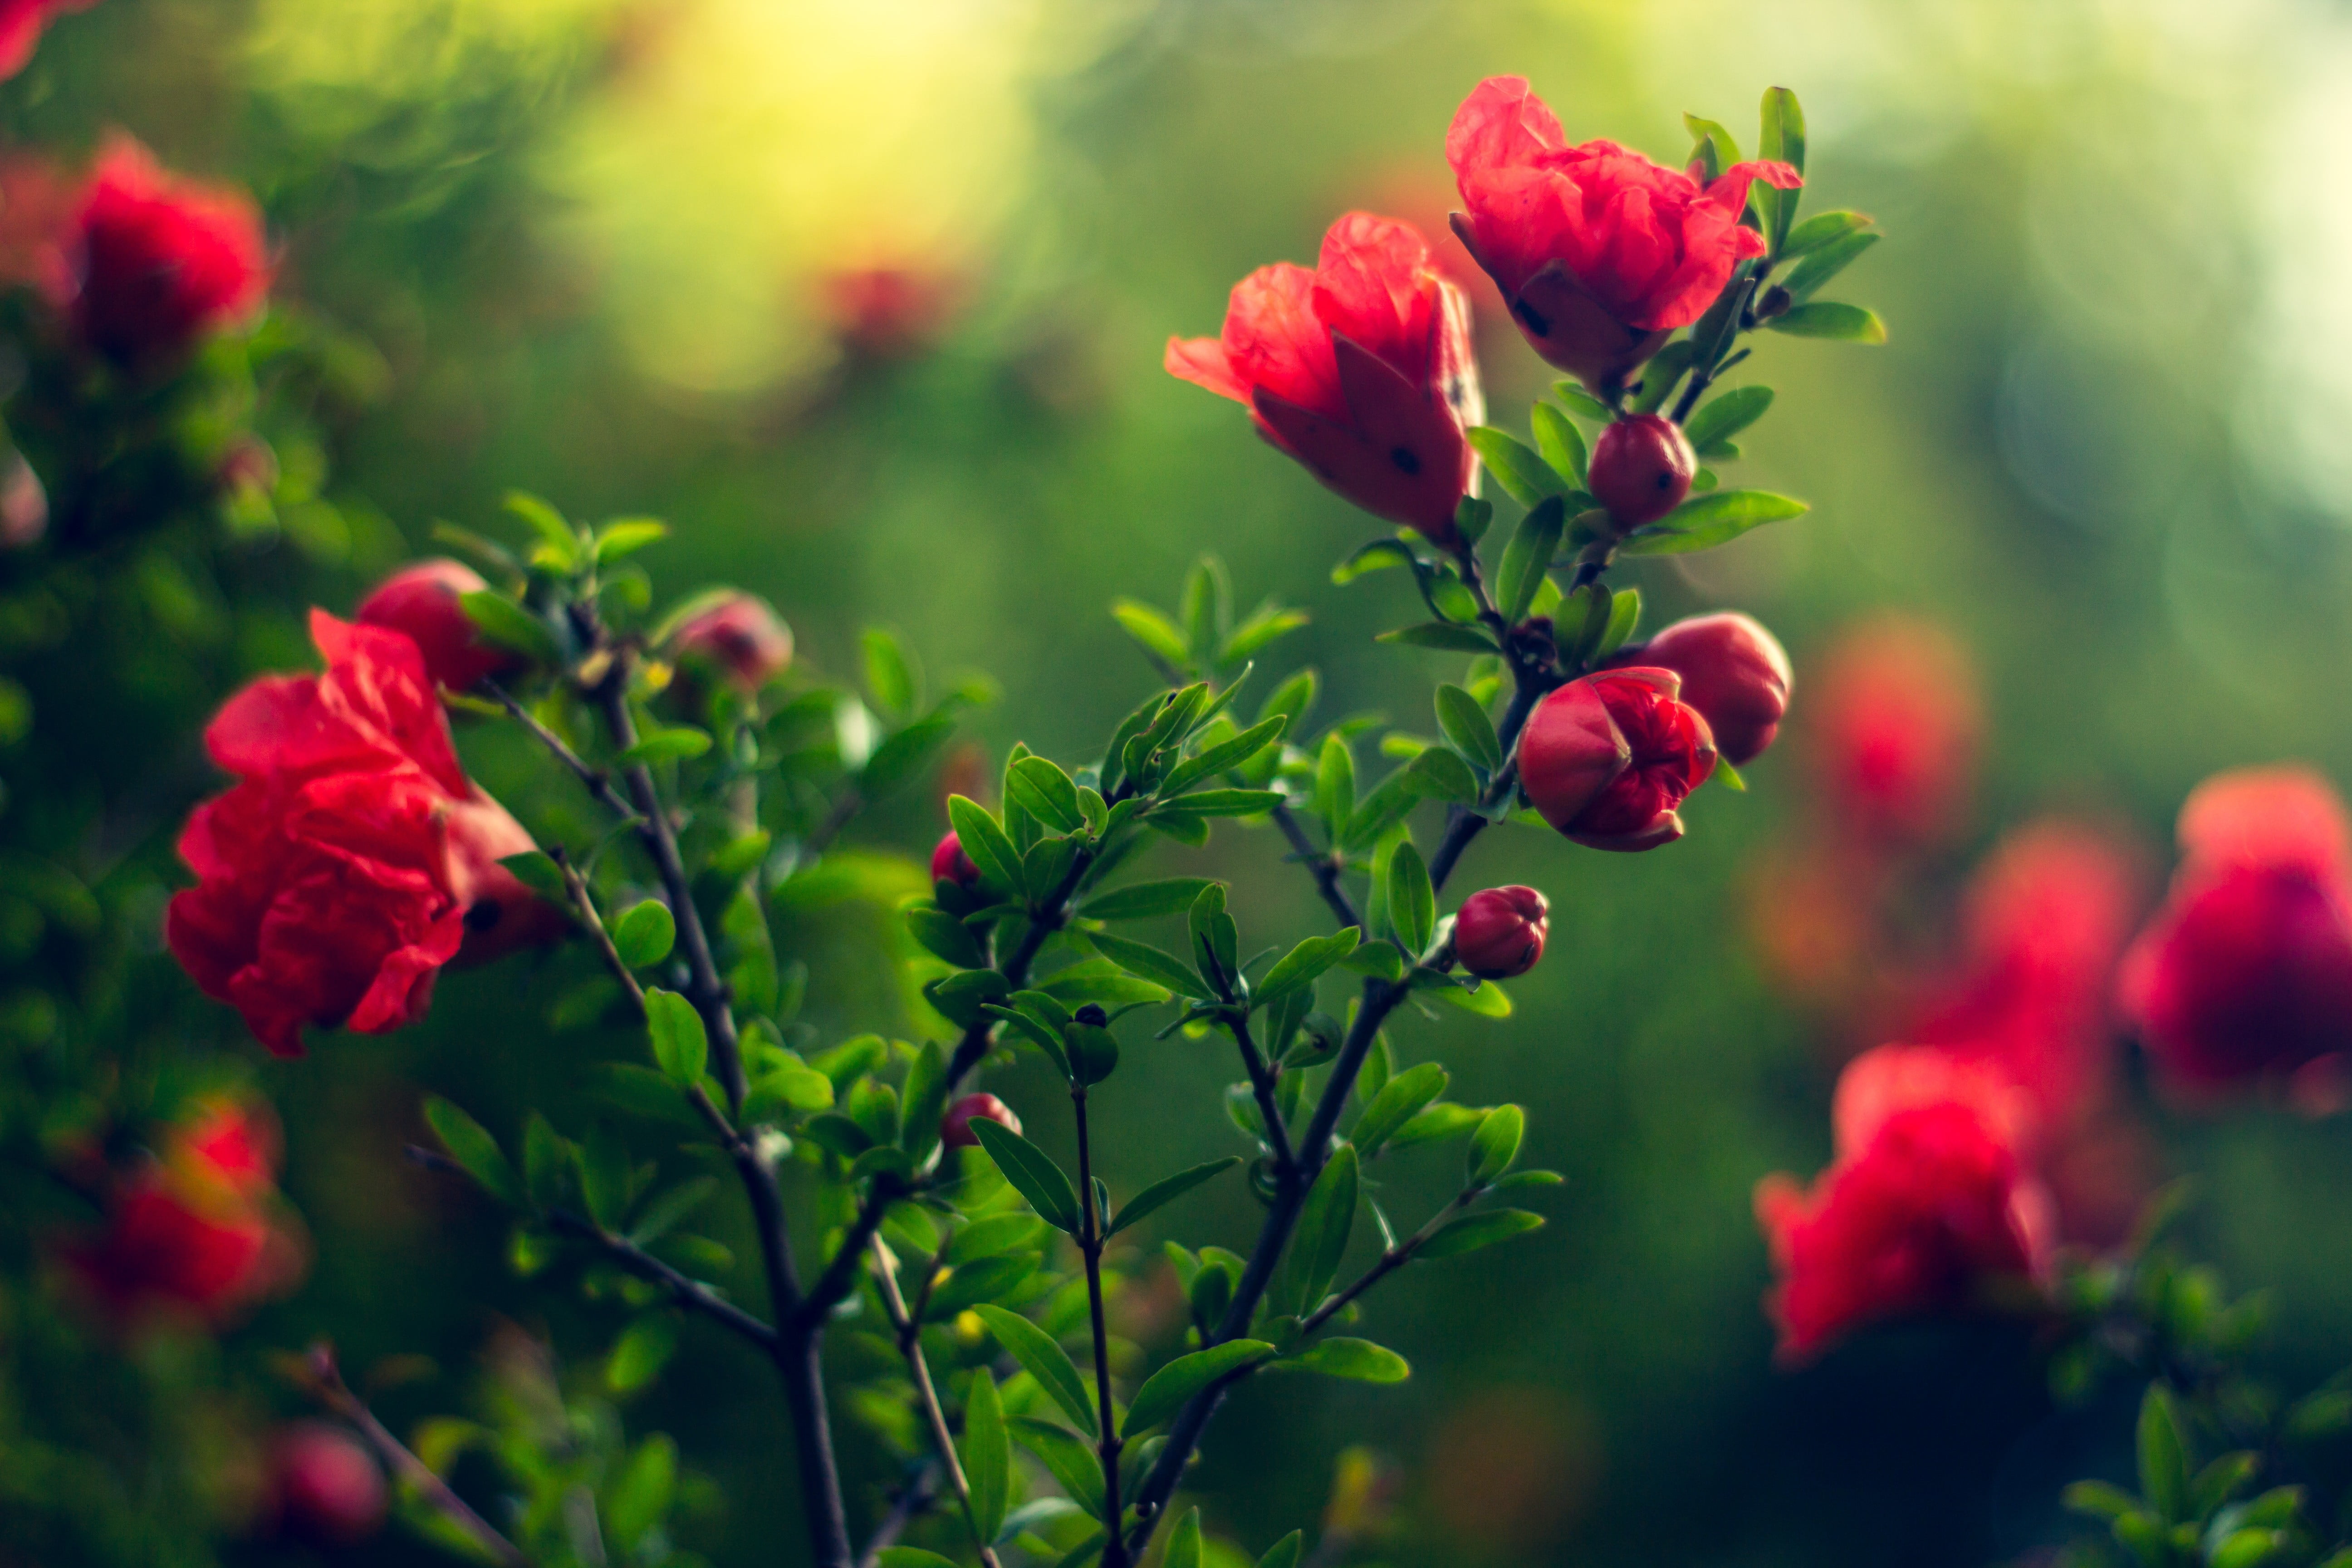 selective focus photograph of red flowers, nature, flowers, depth of field, pink flowers